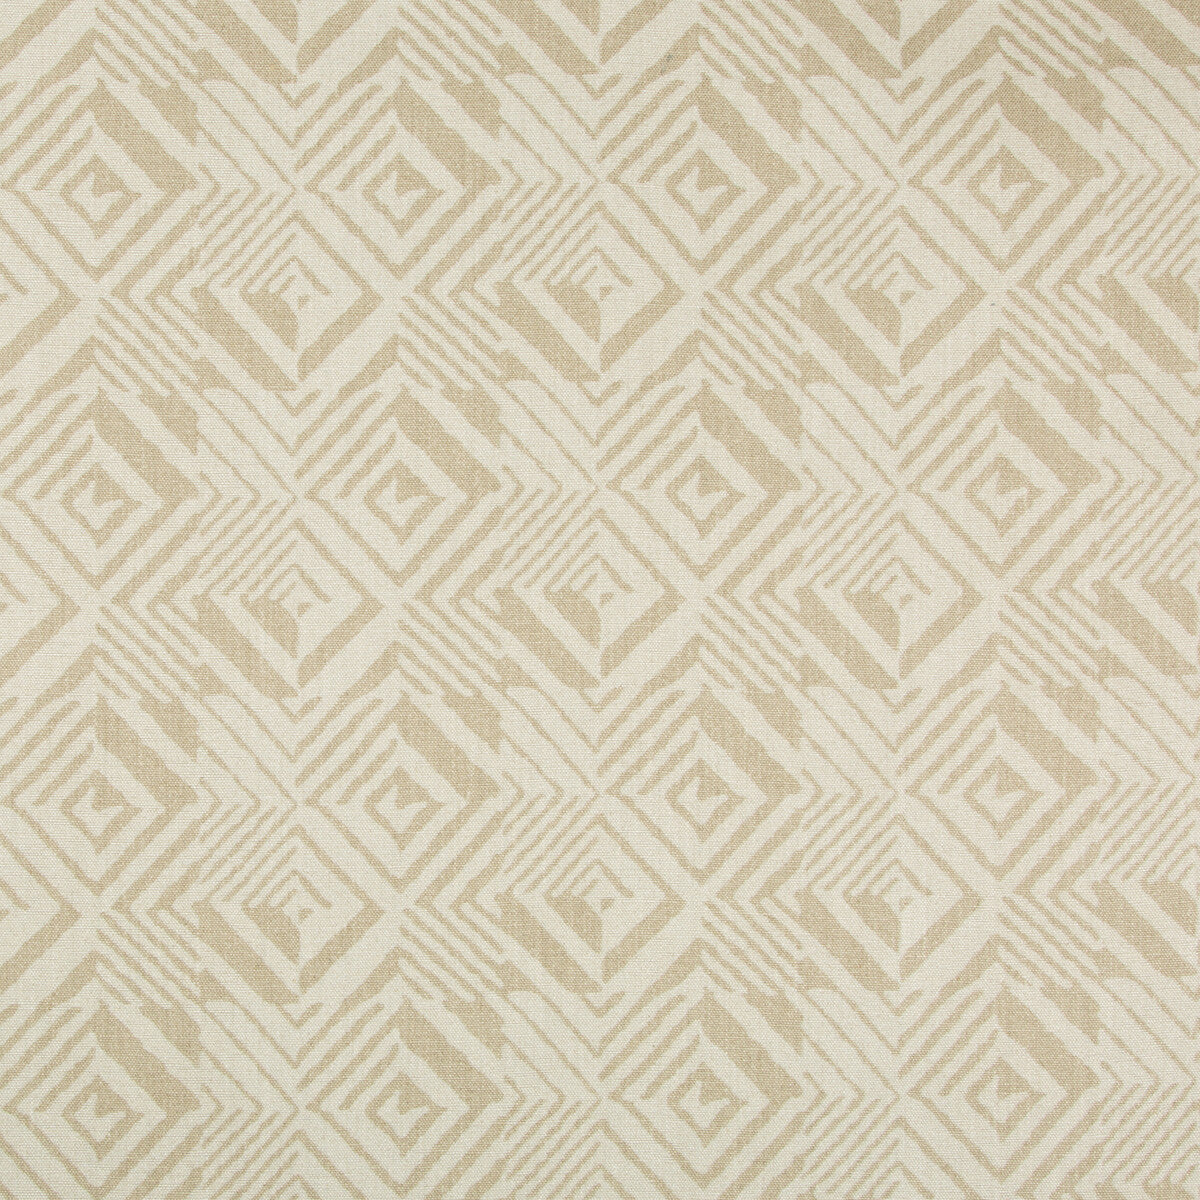 Doyen fabric in linen color - pattern DOYEN.16.0 - by Kravet Couture in the Sue Firestone Malibu collection